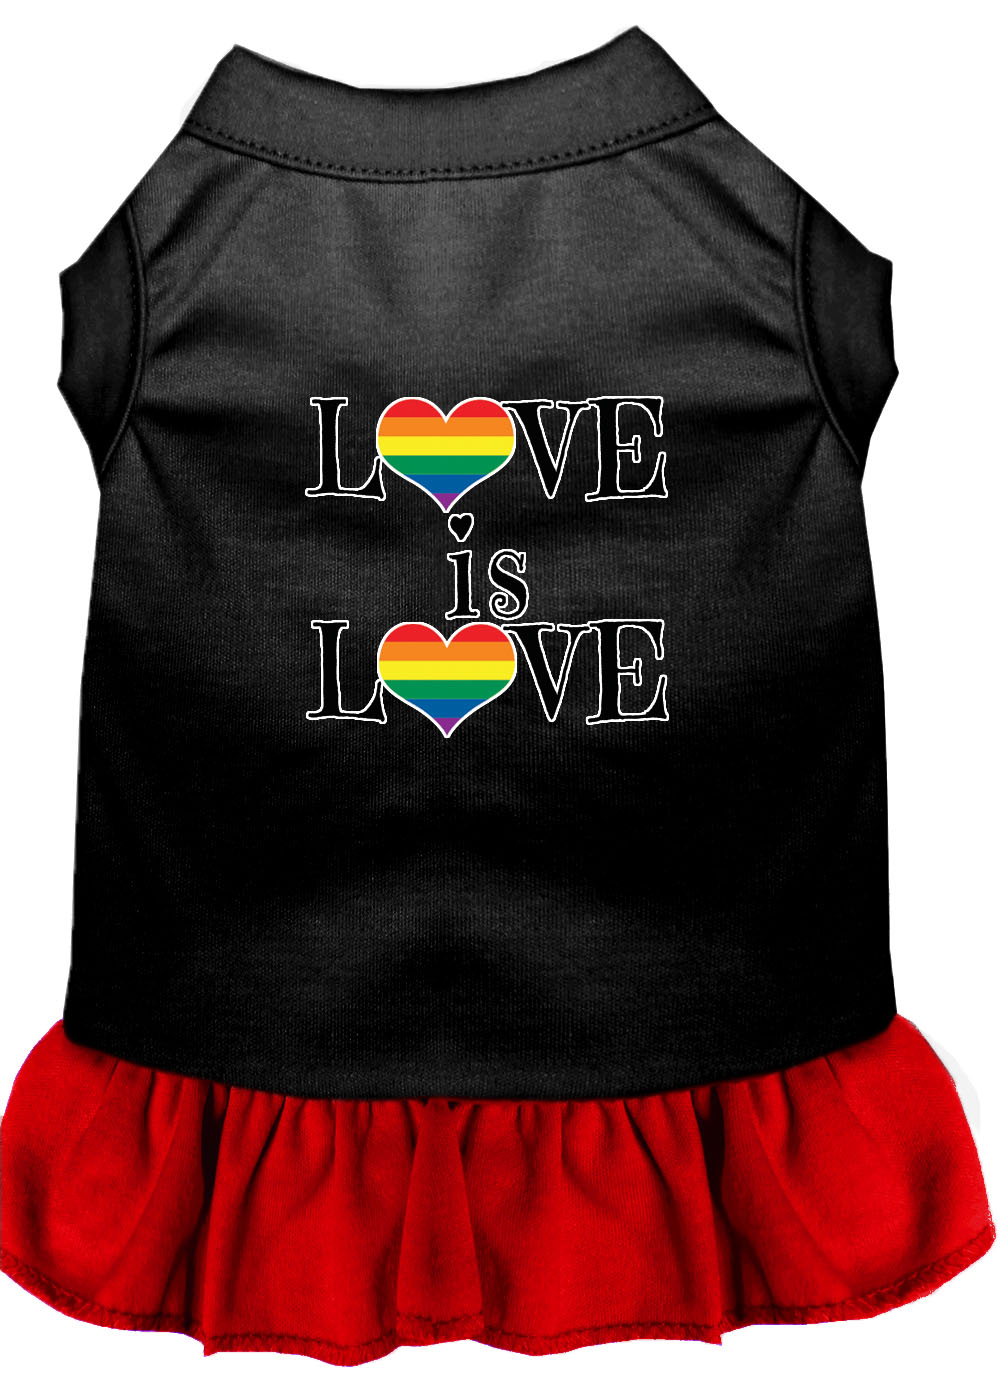 Love is Love Screen Print Dog Dress Black with Red XS